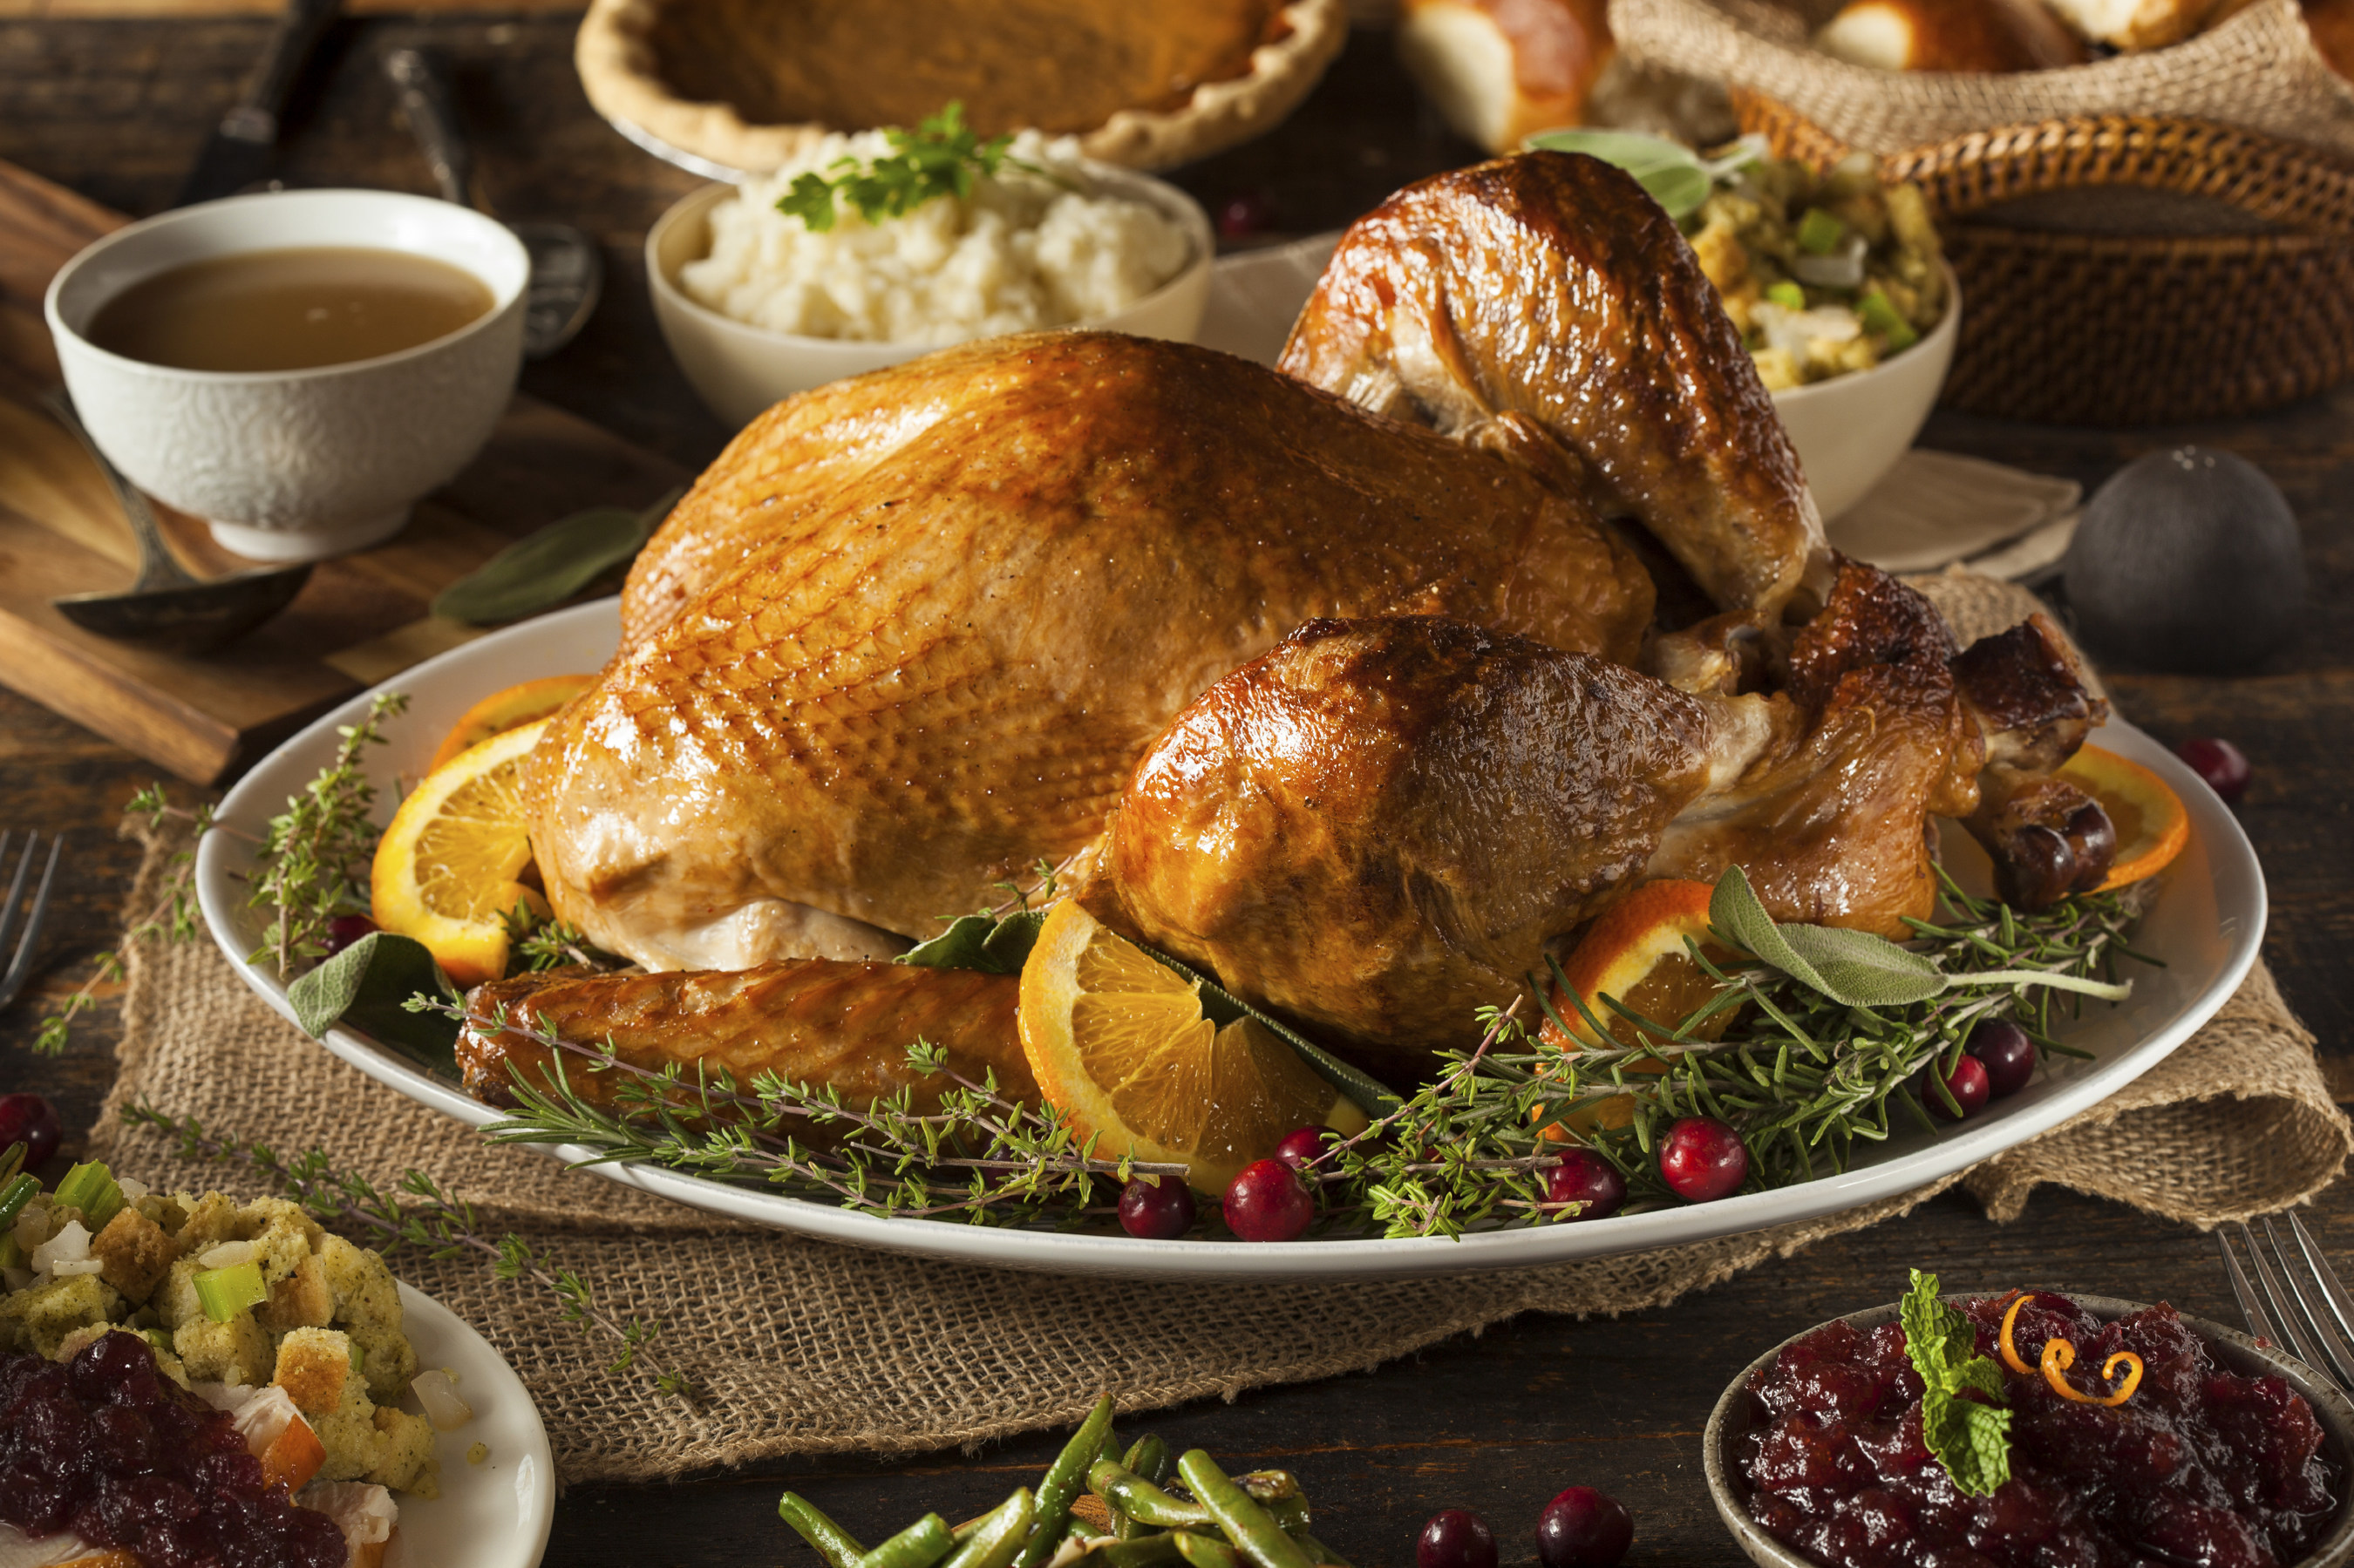 How to deal with the 3,000 calorie Thanksgiving meal: Tips from the Calorie Control Council